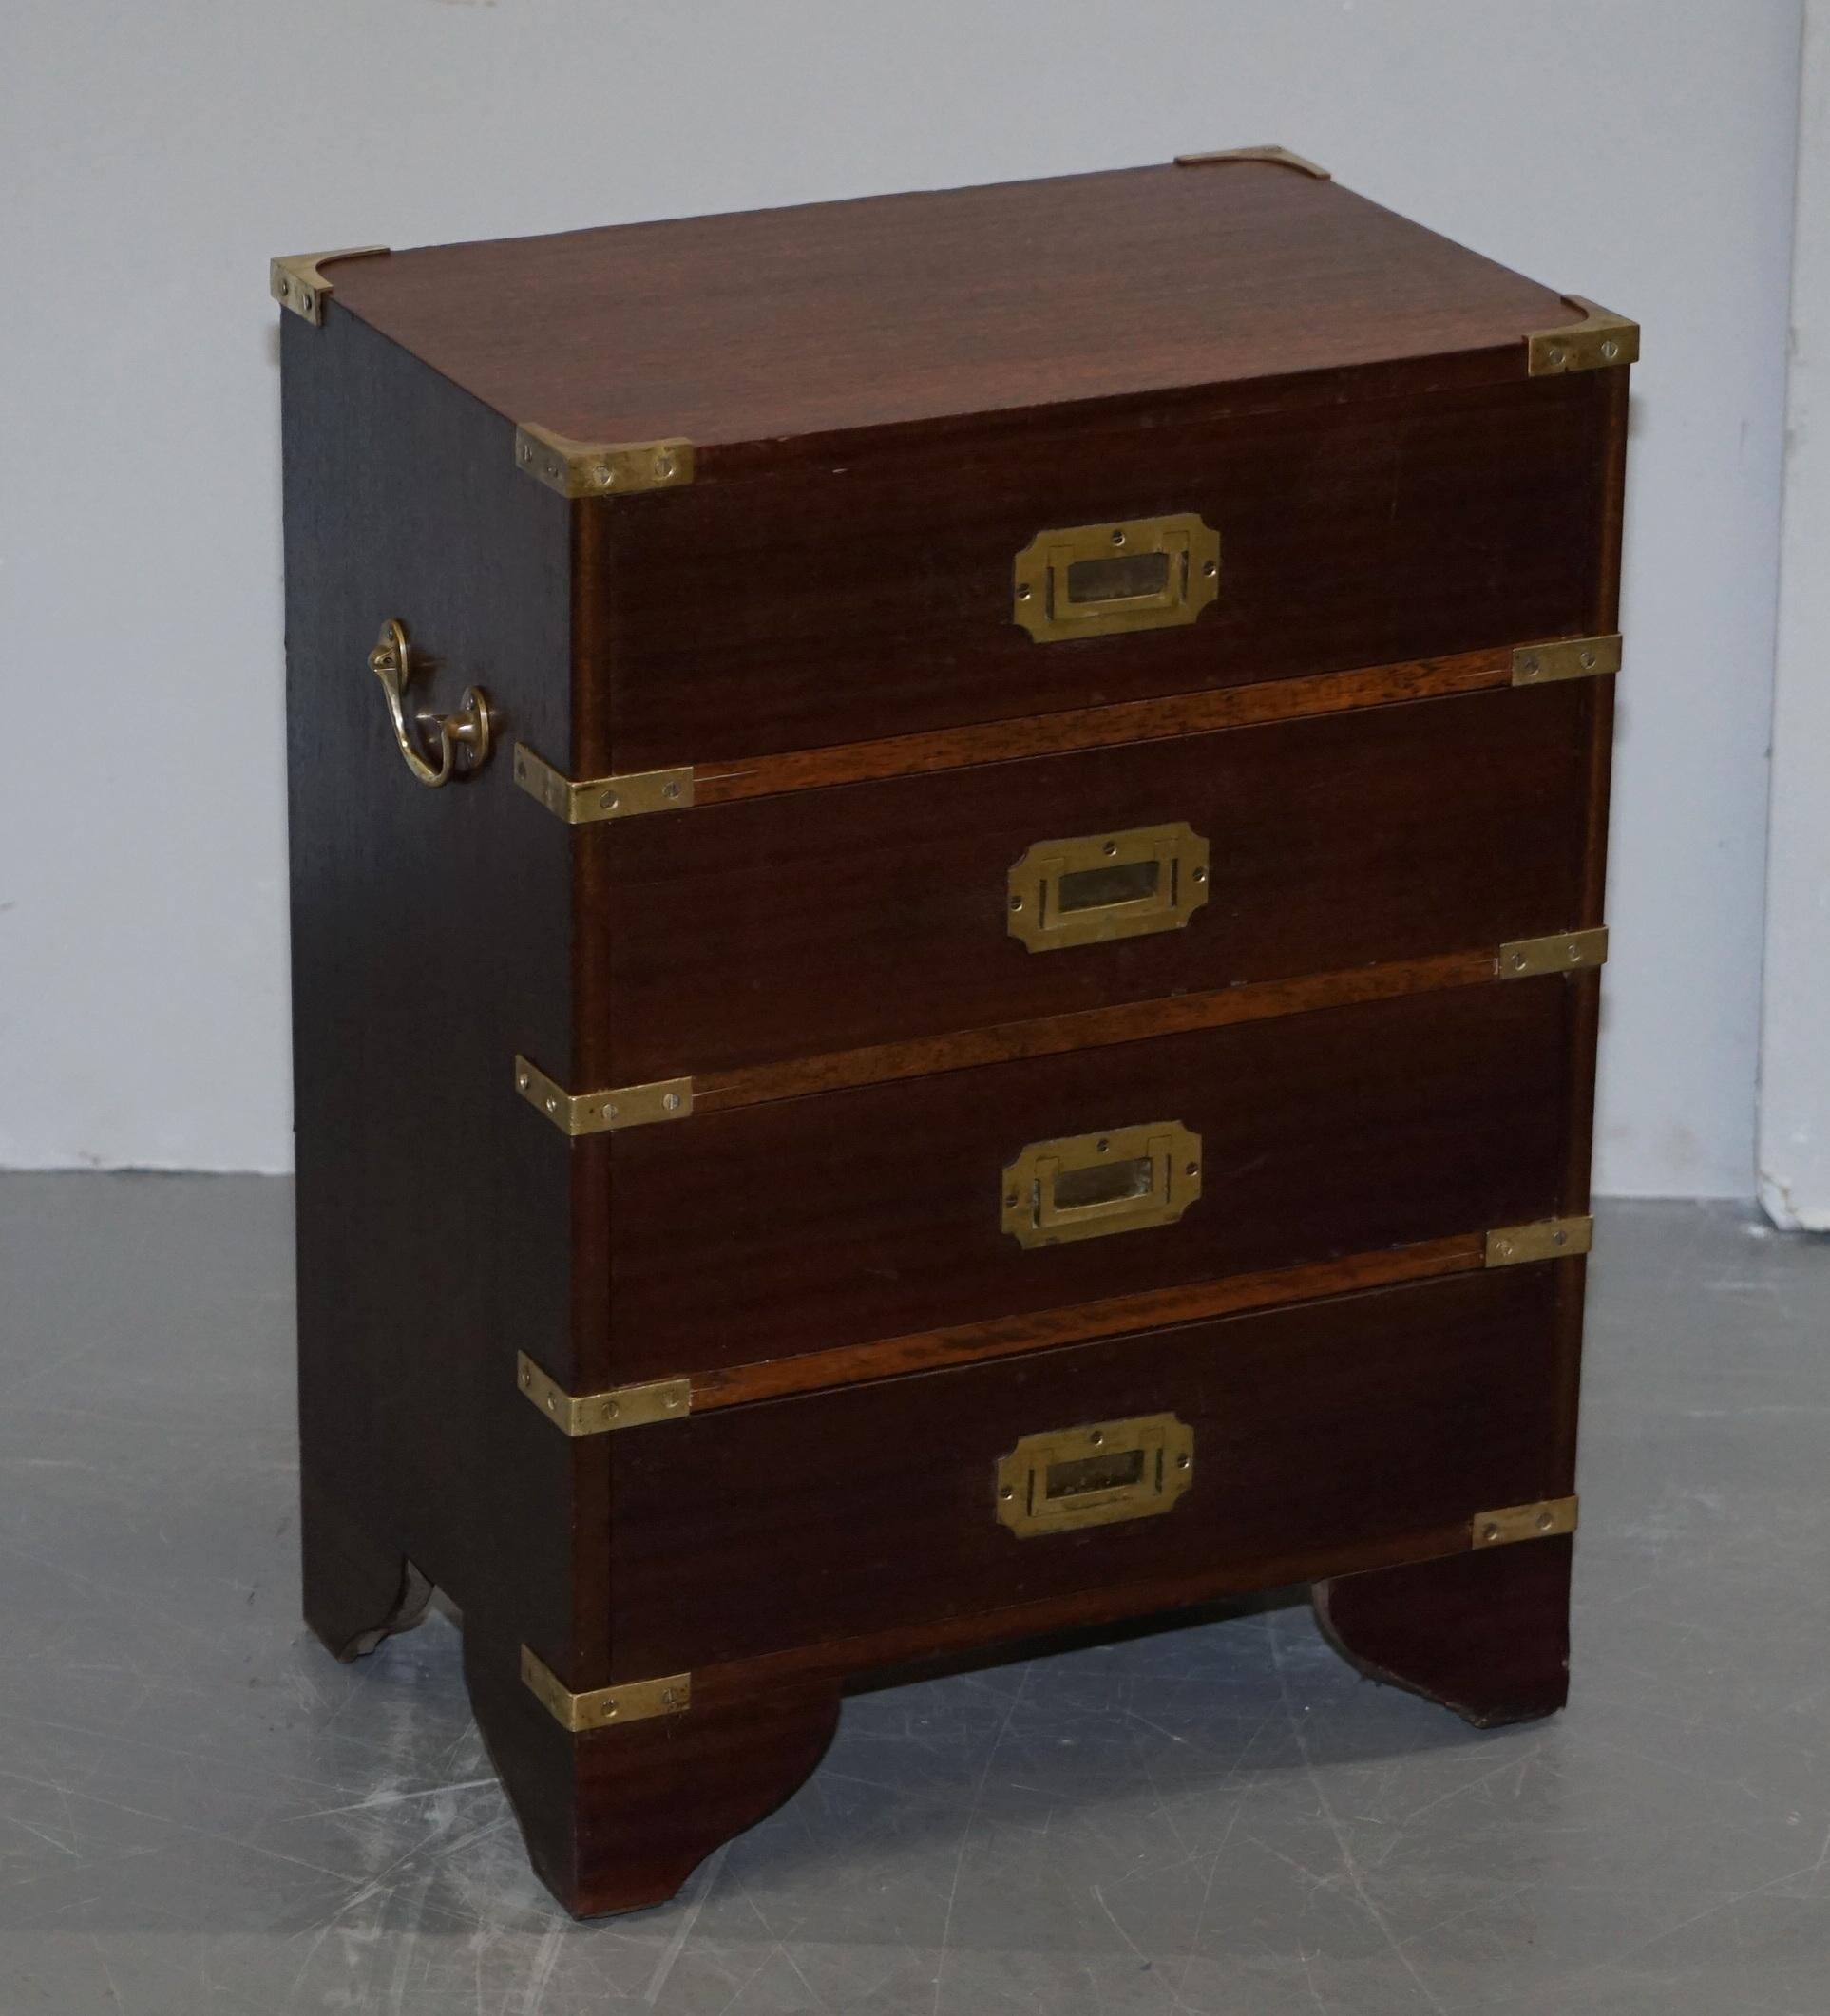 We are delighted to offer for sale this stunning pair of Vintage Harrods London mahogany Military Campaign side lamp or wine table sized chests of drawers

A very luxurious and well made pair, the frames are mahogany veneer, they have a solid